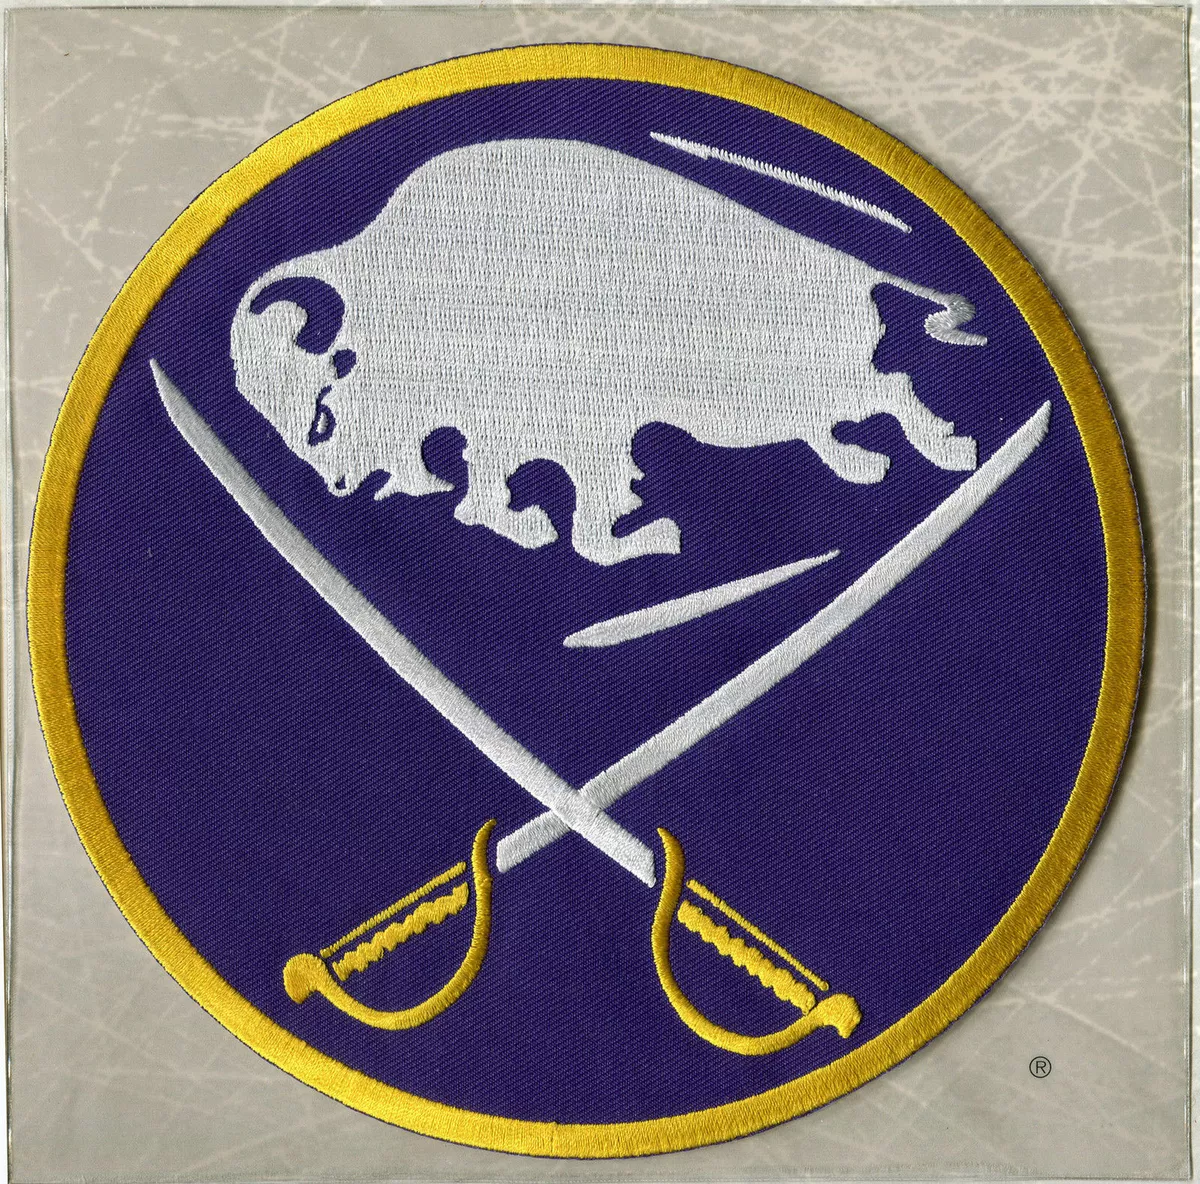 ALTERNATE A OFFICIAL PATCH FOR BUFFALO SABRES